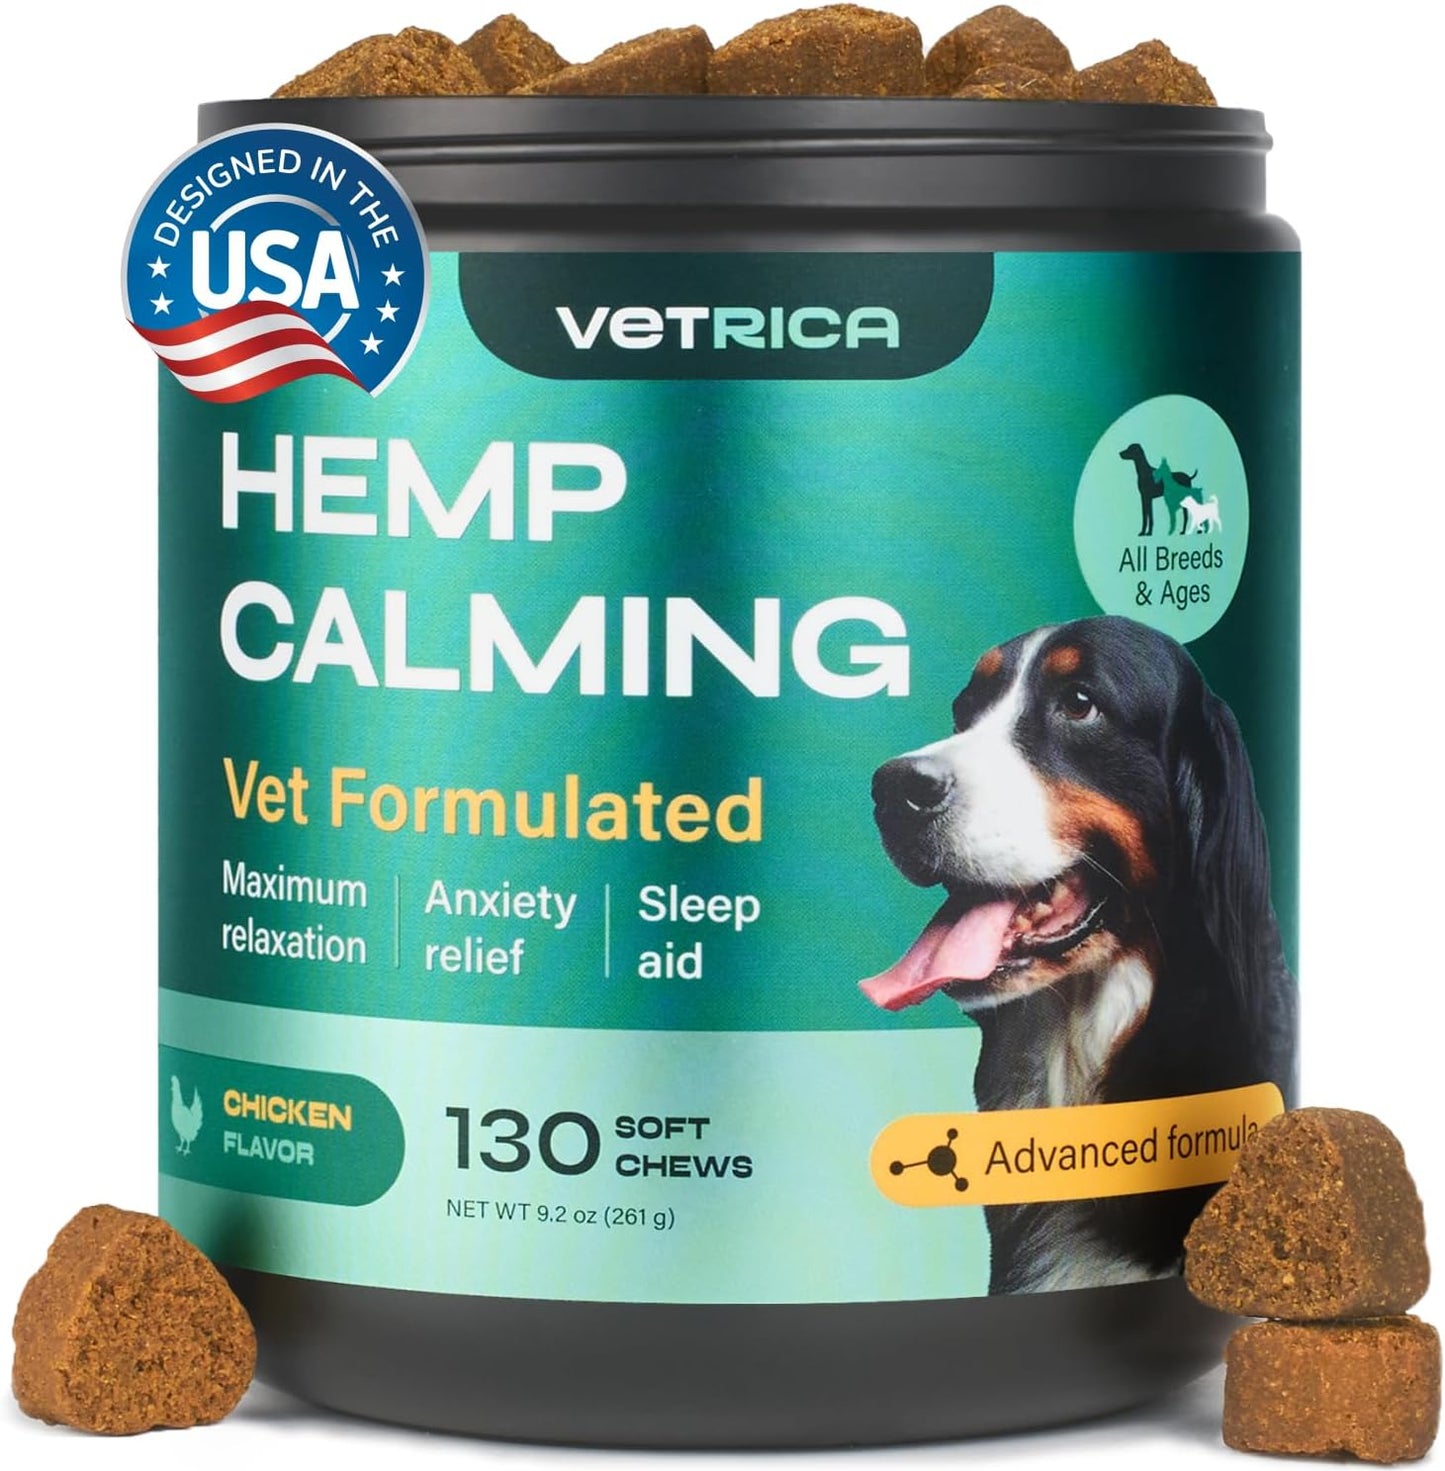 Calming Chews for Dogs - Dog Calming Treats Anxiety Relief - Hemp Calming Chews for Dog Anxiety Relief - Calming Treats for Dogs Stress, Separation, Storms & Anxiety Relief - with Hemp Seed Oil